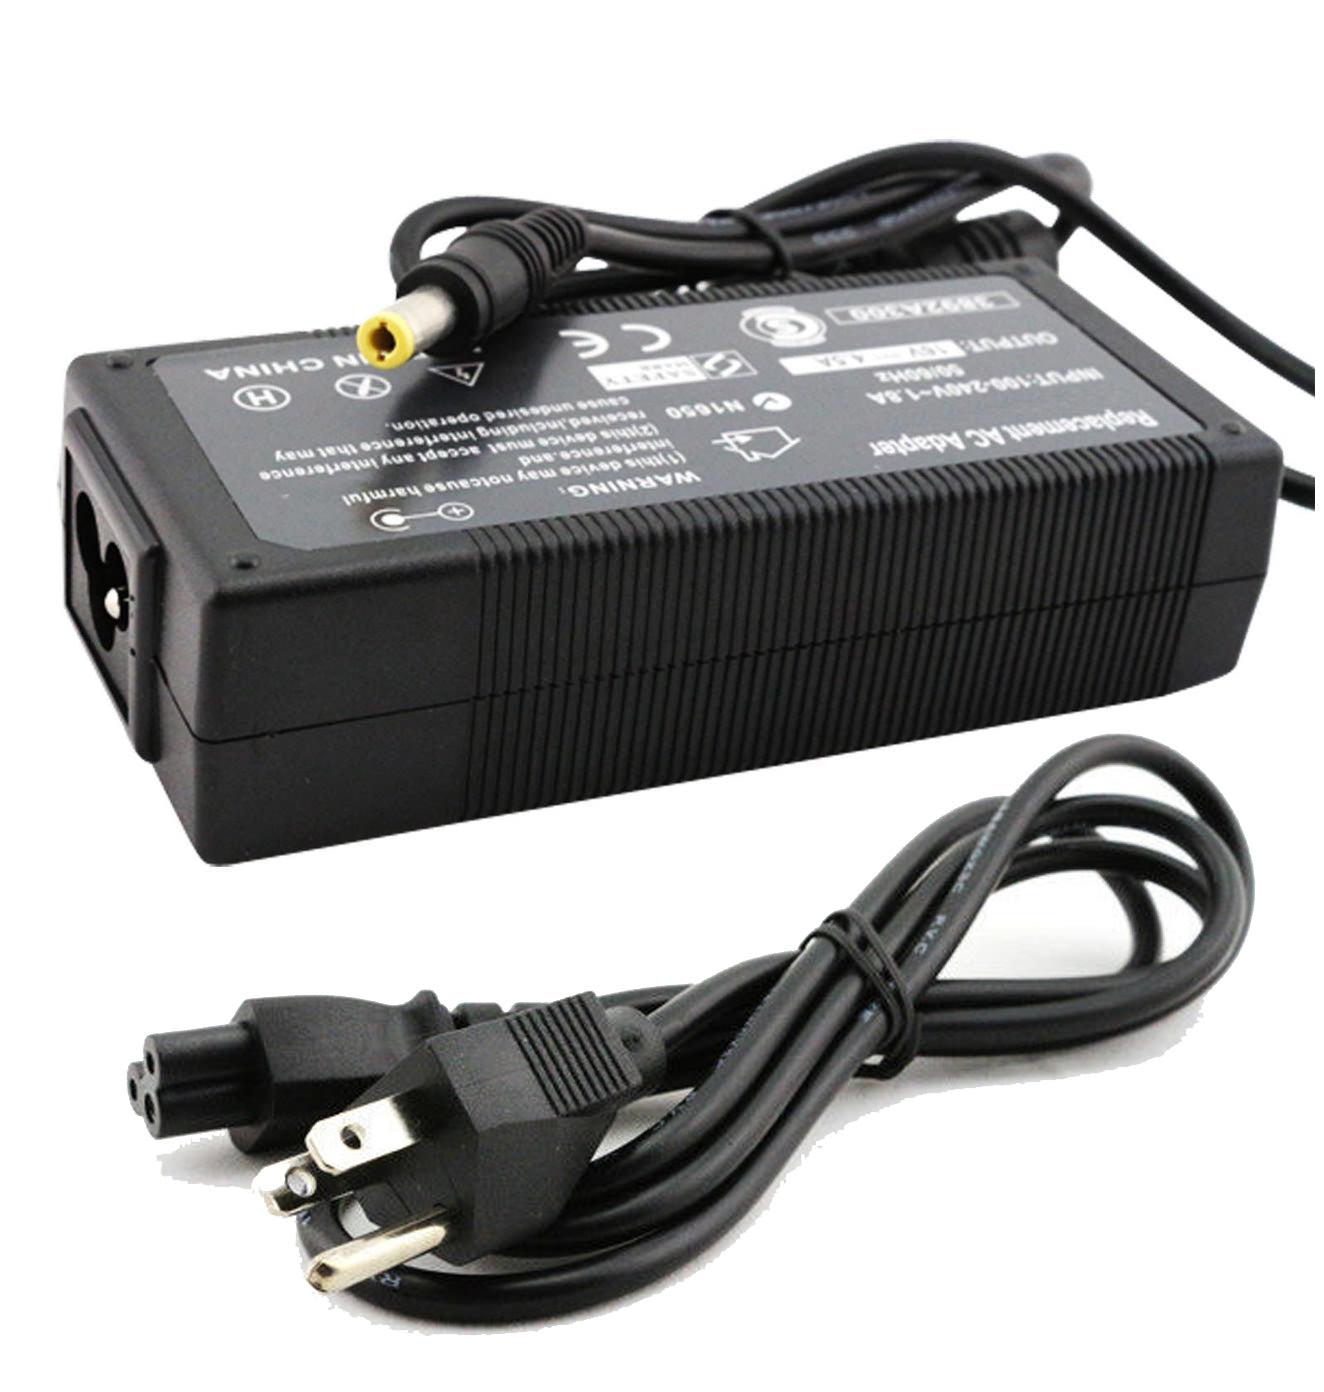 AC Adapter Charger for IBM ThinkPad R33 Notebook.